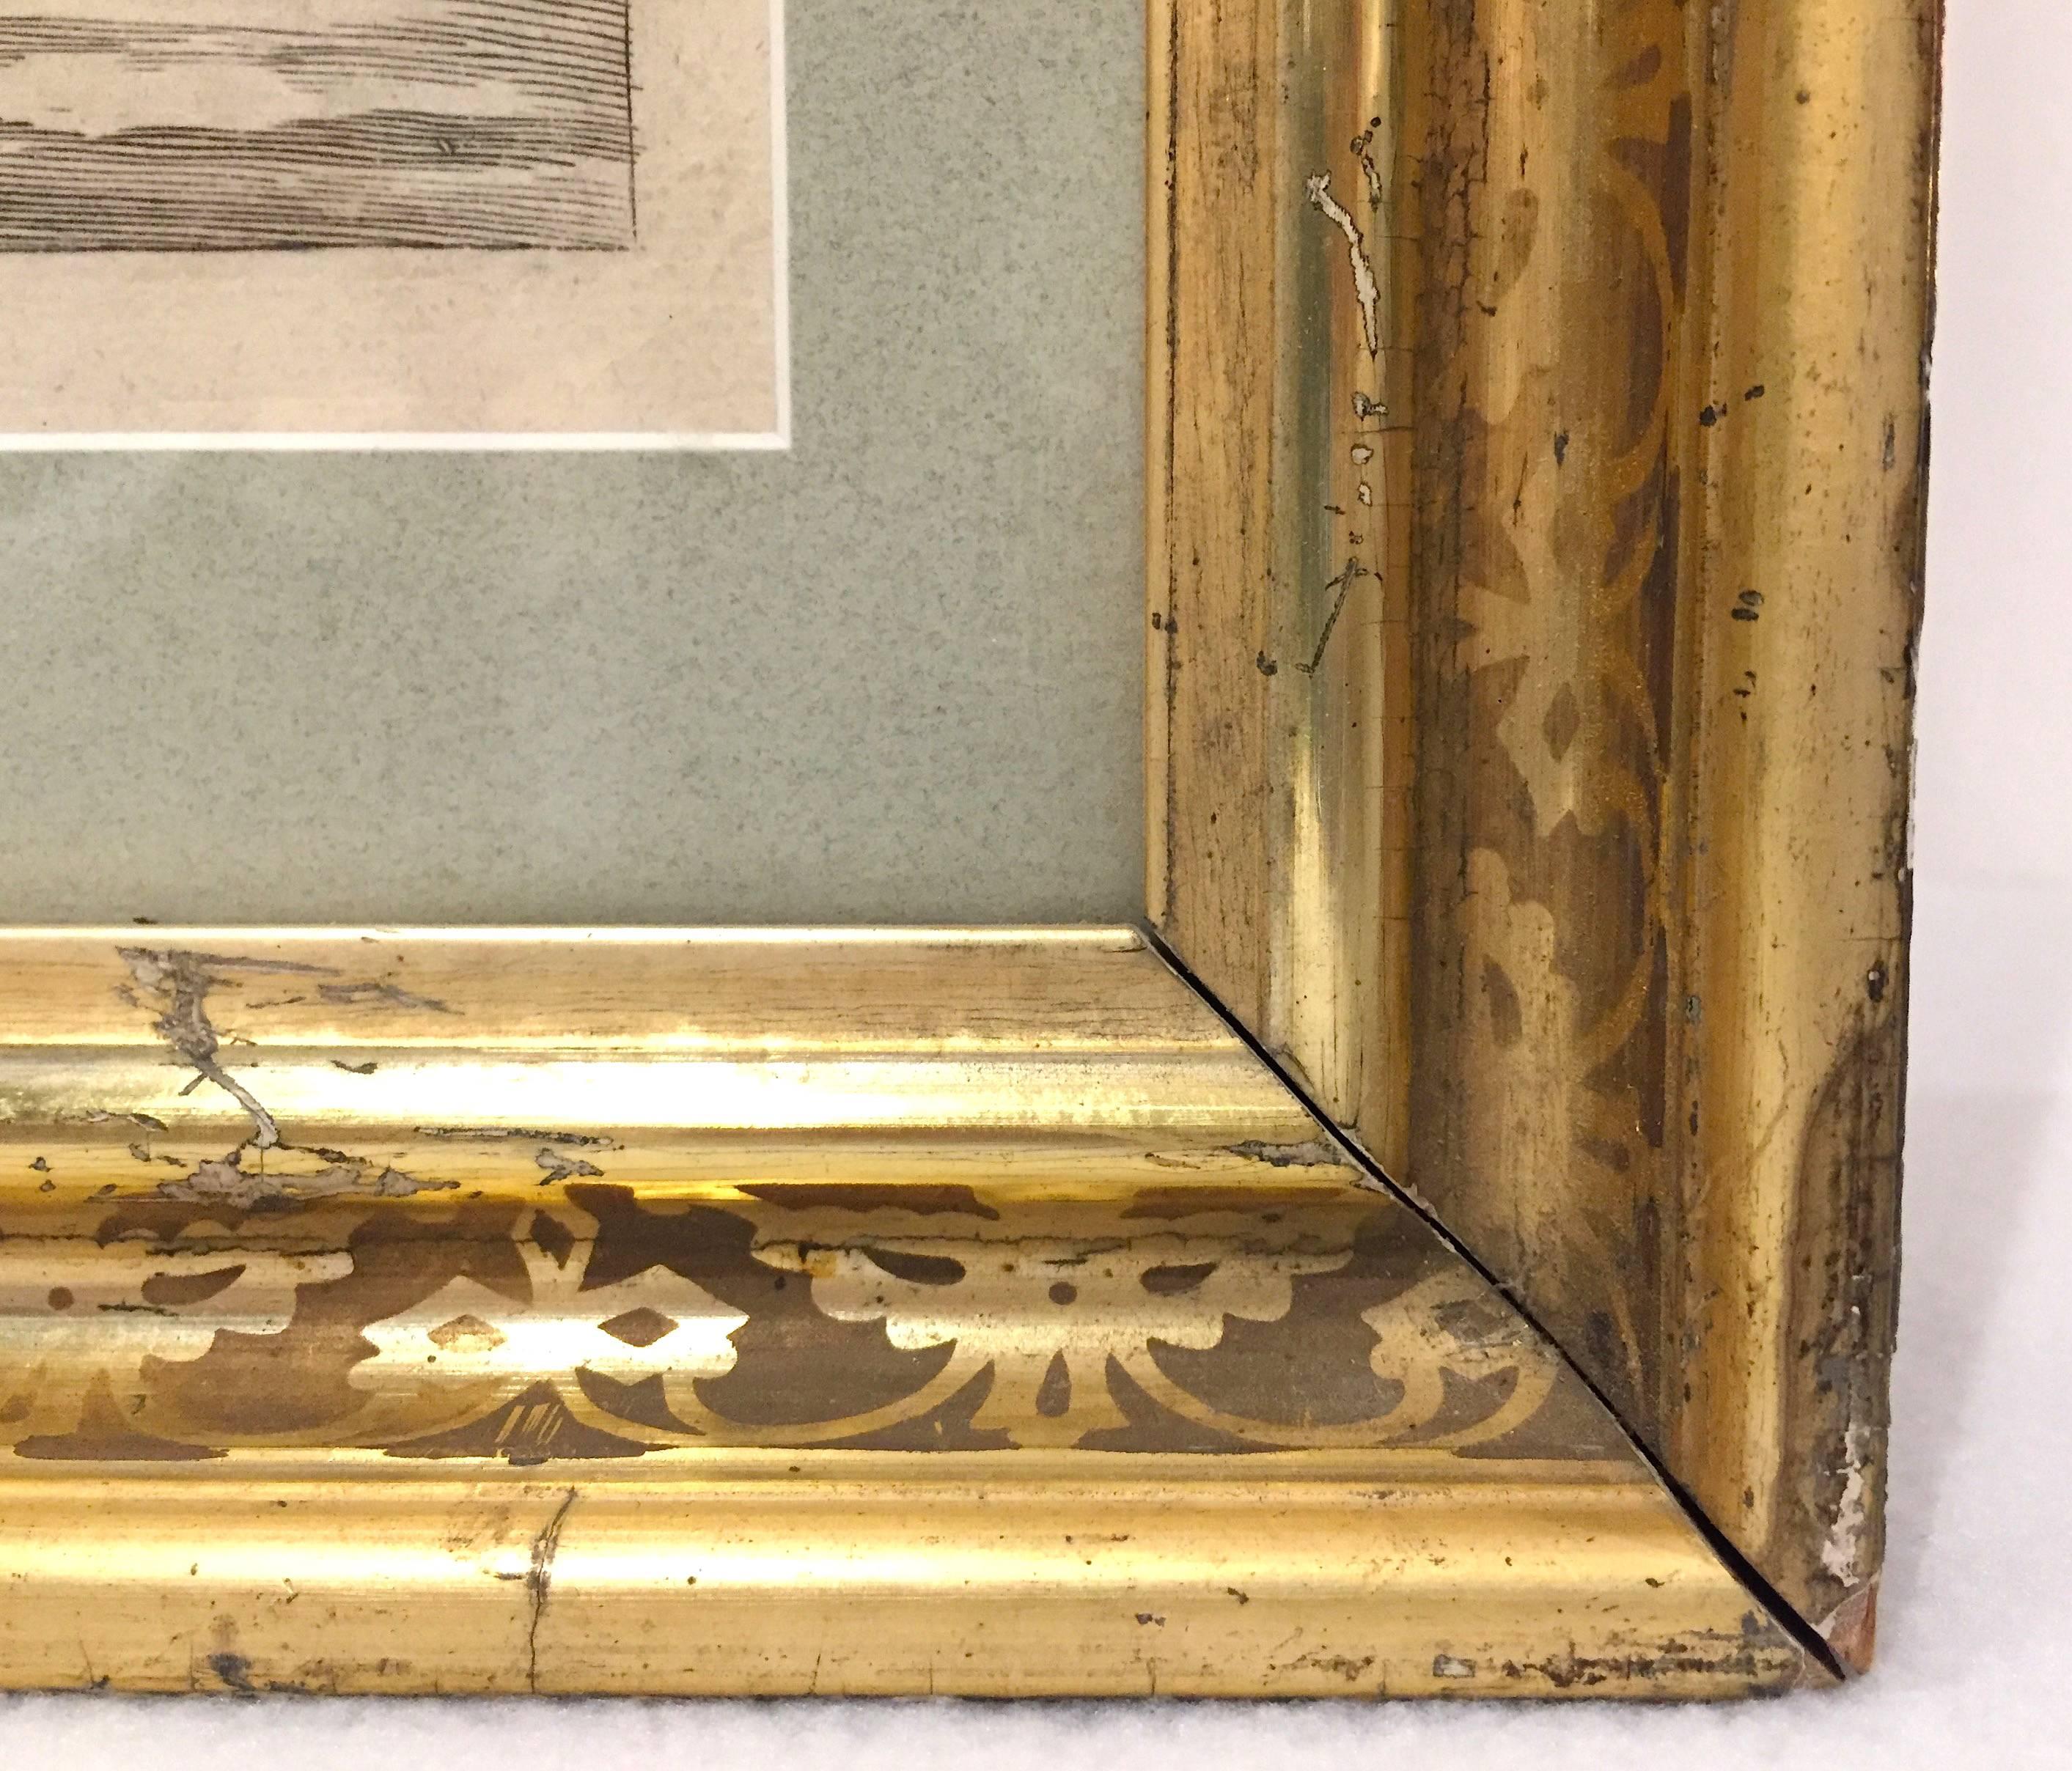 Very rare engravings, plate 11 and 12 of a series, of mating horses.
The engravings show the plate mark and are numbered 11 and 12.
The frames are refined gilded wood and do show some distressing.